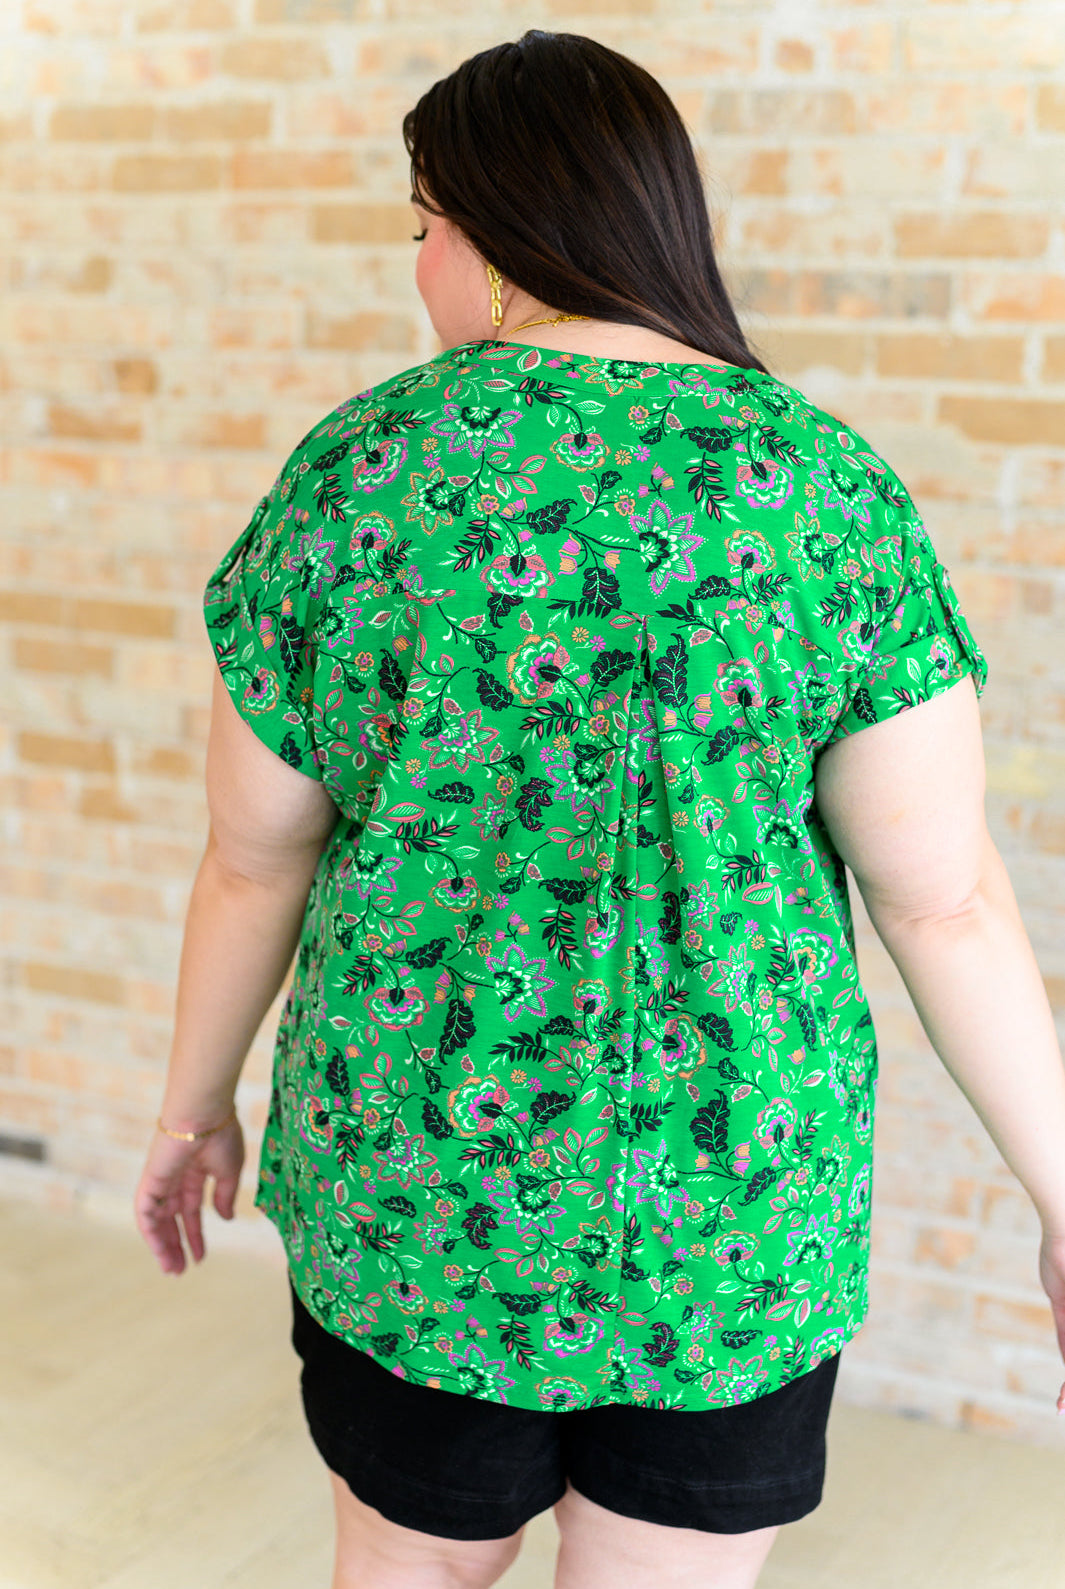 Lizzy Cap Sleeve Top in Green and Black Floral-Short Sleeve Tops-Krush Kandy, Women's Online Fashion Boutique Located in Phoenix, Arizona (Scottsdale Area)